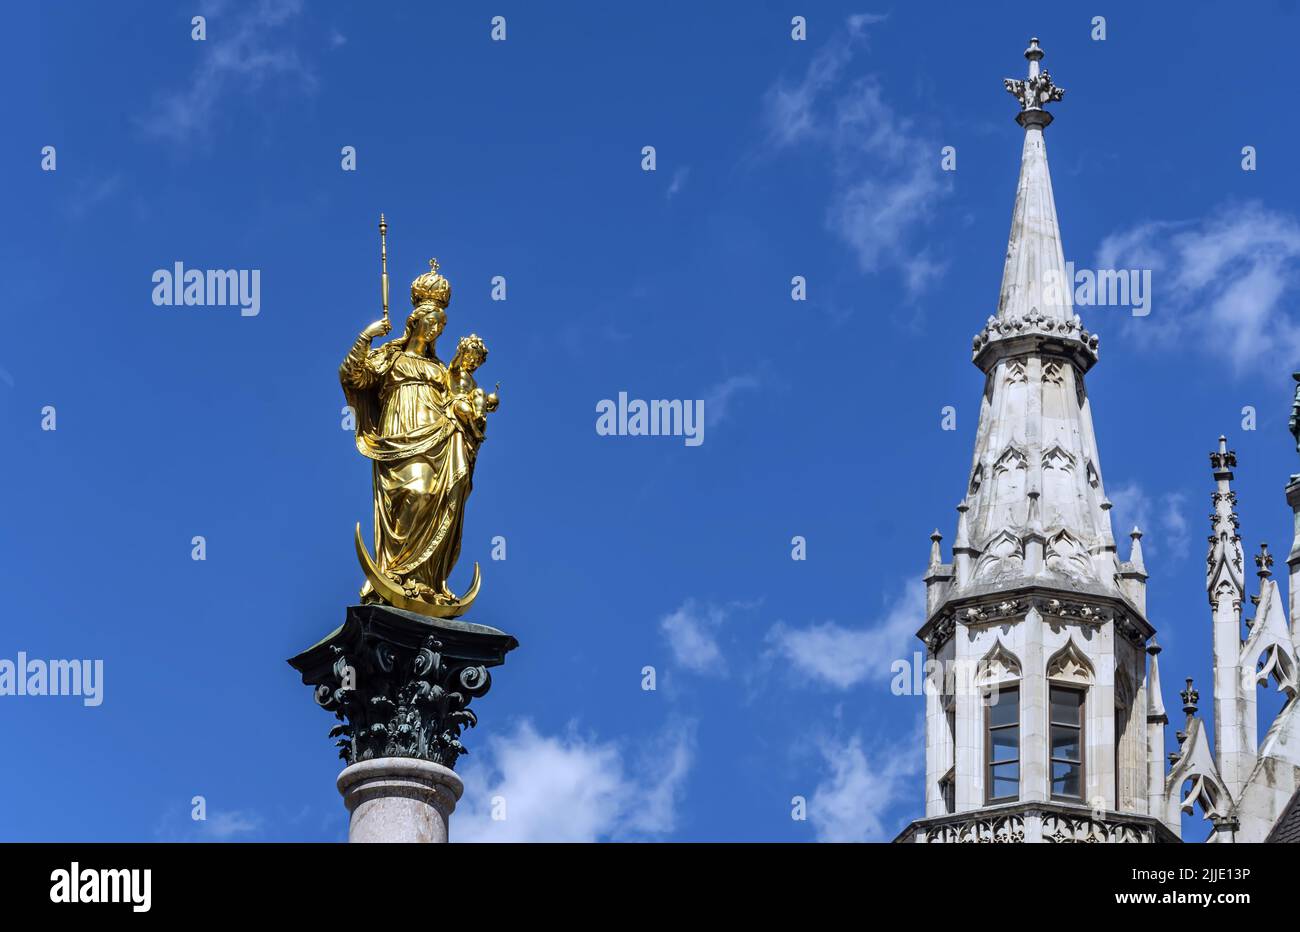 The statue of the Mariensäule on Marienplatz in Munich. The Mariensäule is a golden colored statue depicting the Madonna and Child Jesus standing on a Stock Photo